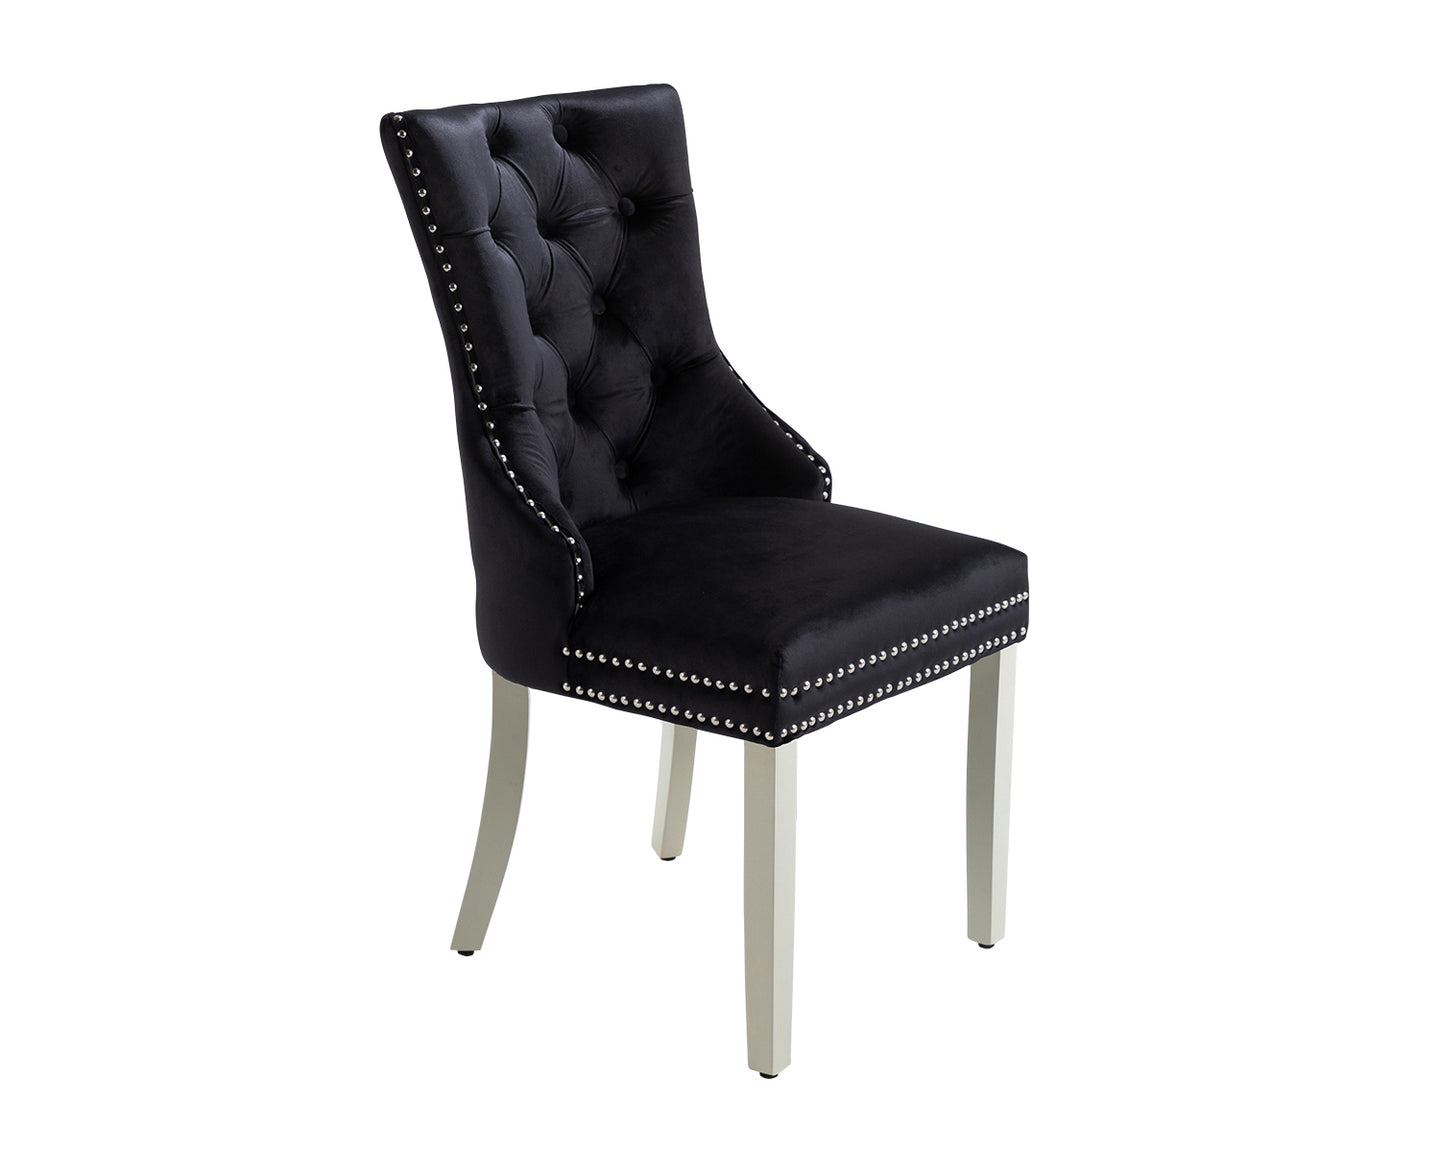 Ashford Dining Chair in Black Velvet with Square Knocker And Grey Legs